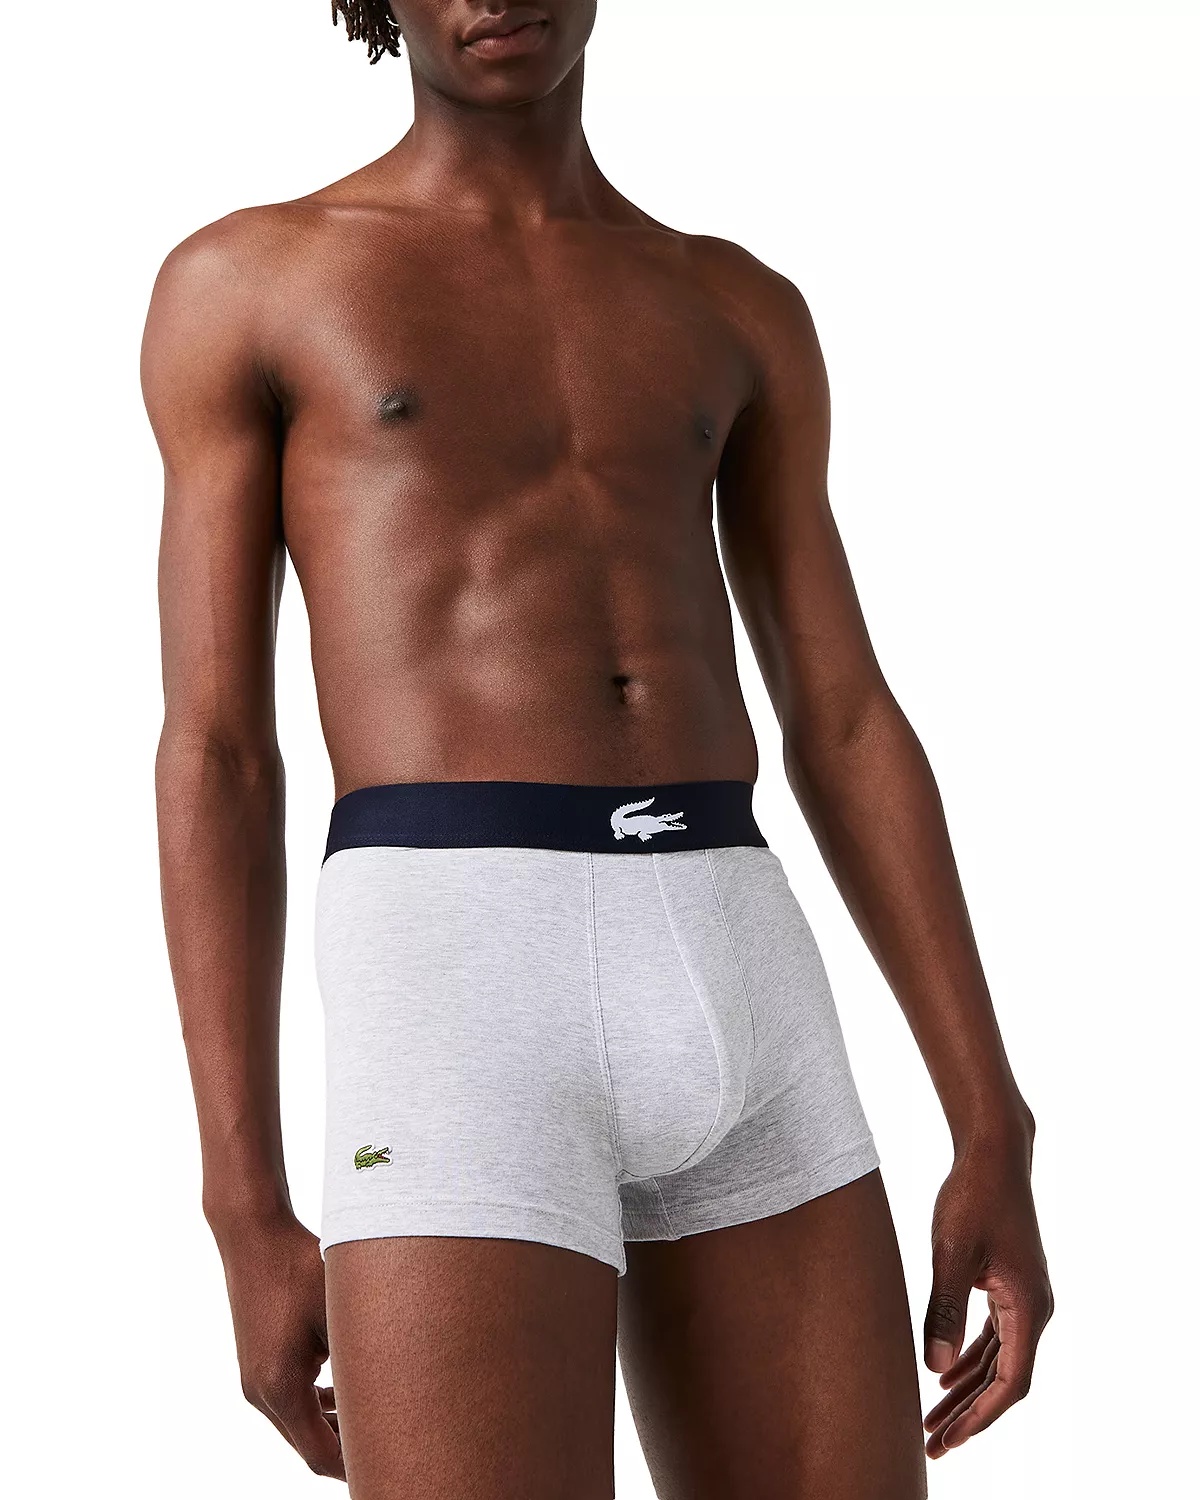 Cotton Stretch Trunks, Pack of 3 - 2